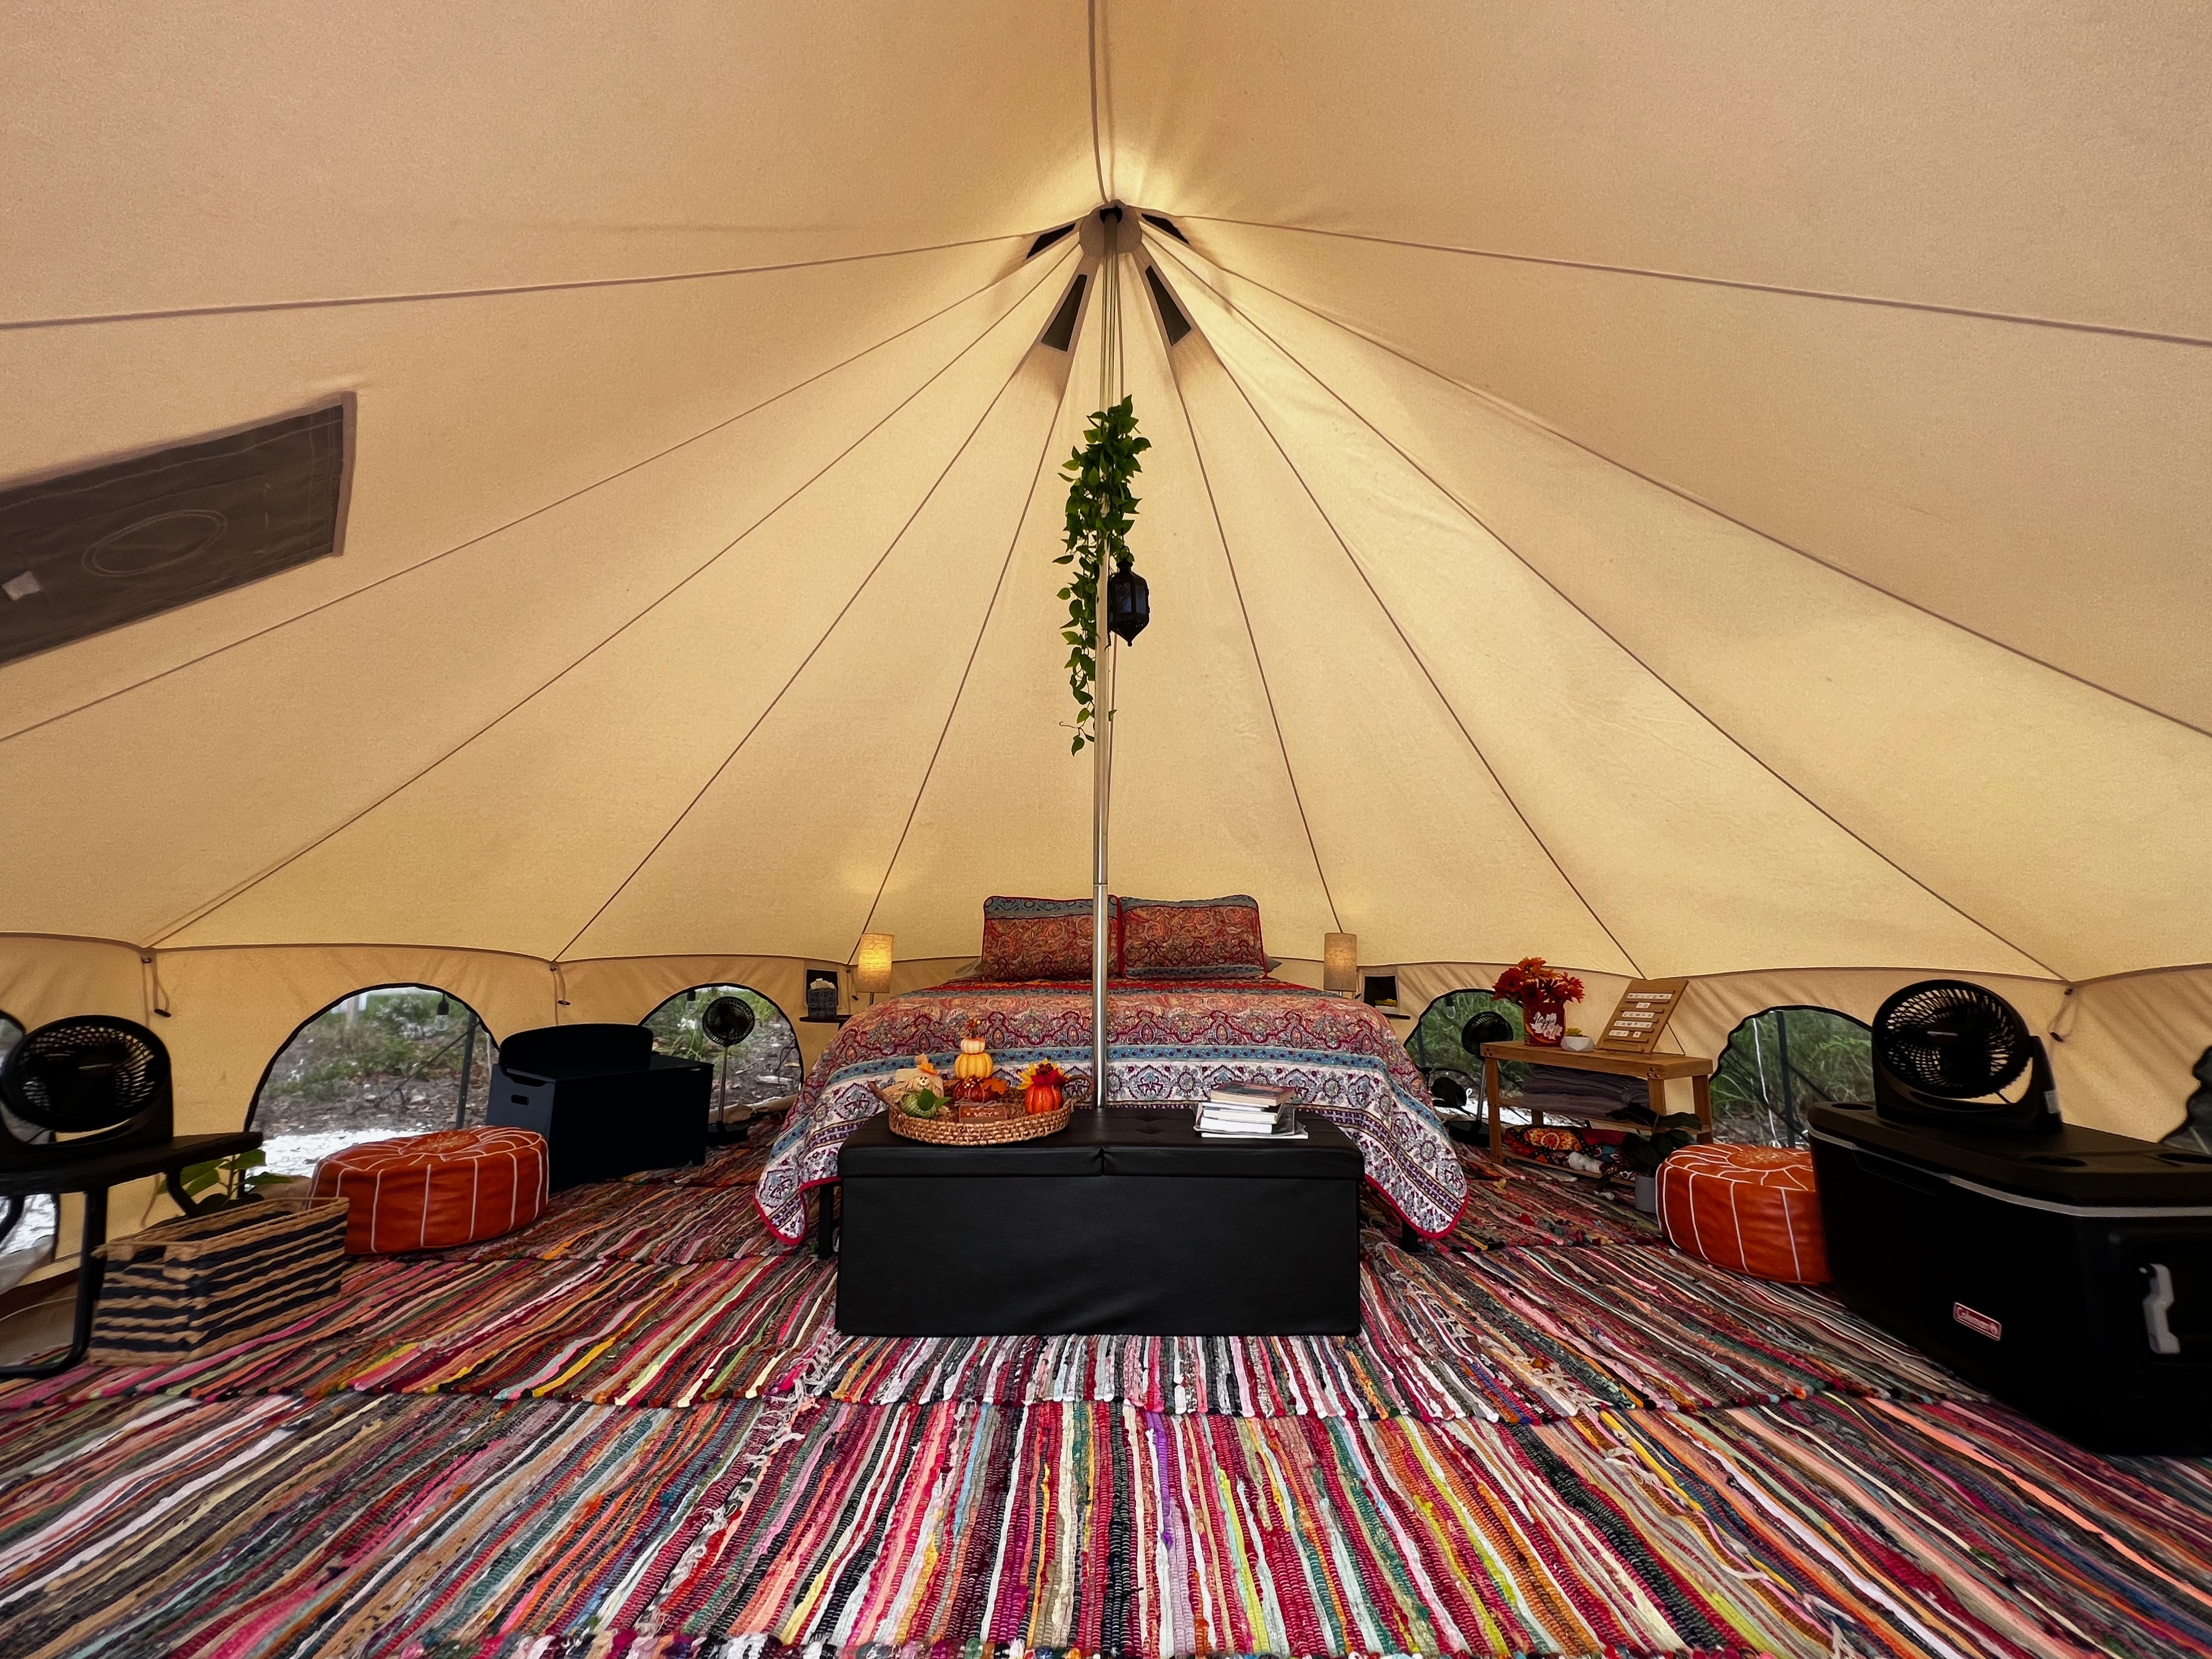 Inside the glamping tents, Site A and Site B.